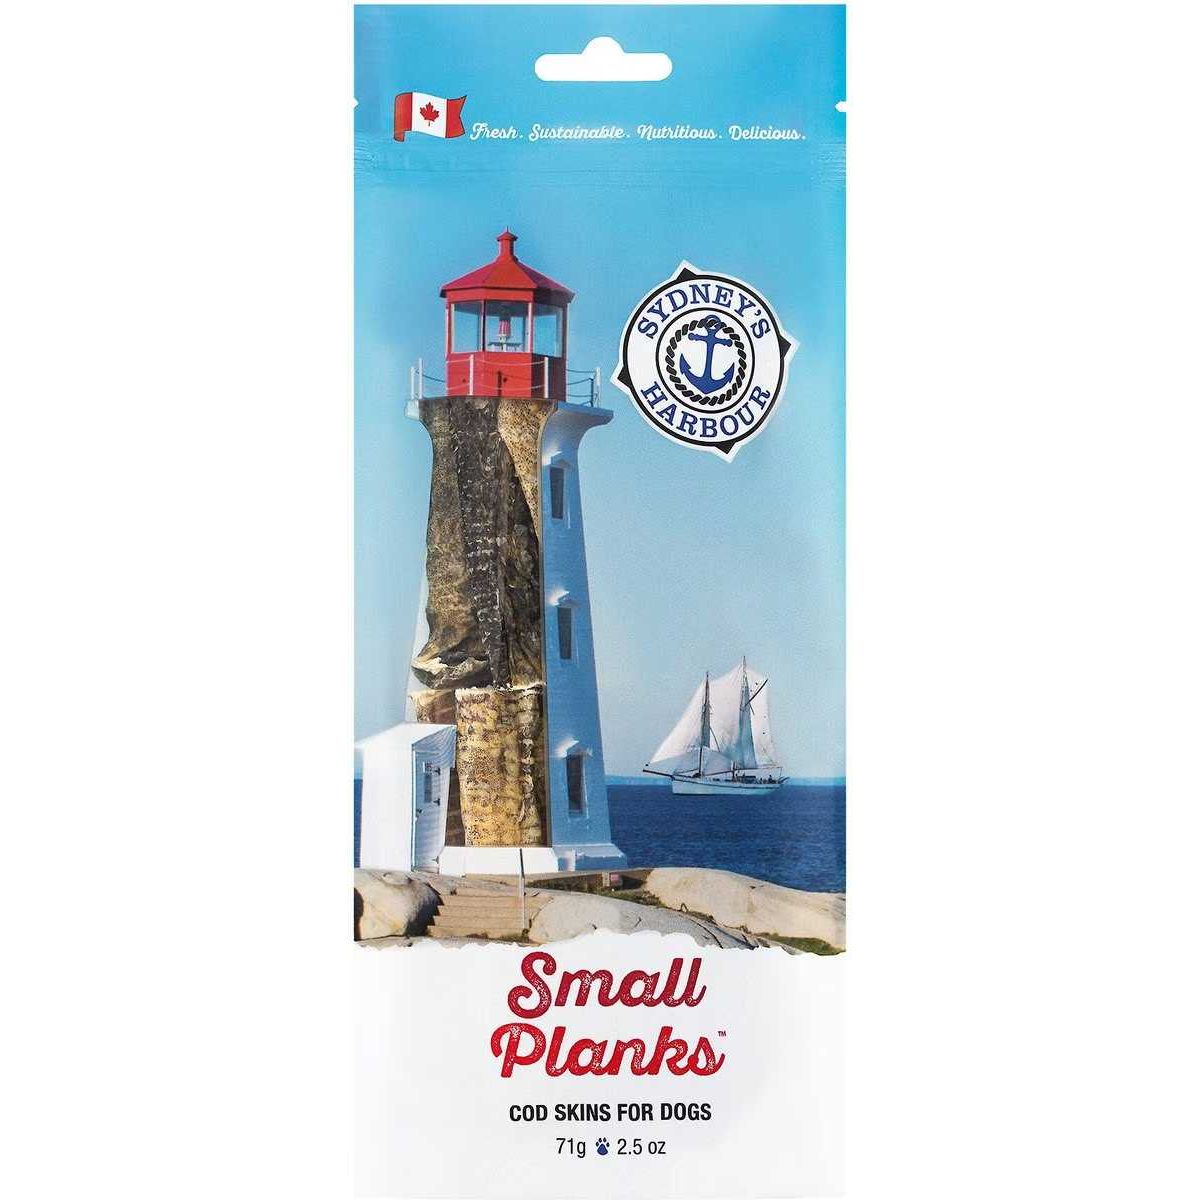 This & That Harbour Small Fish Planks Dehydrated Cat & Dog Treat 2.5oz This & That